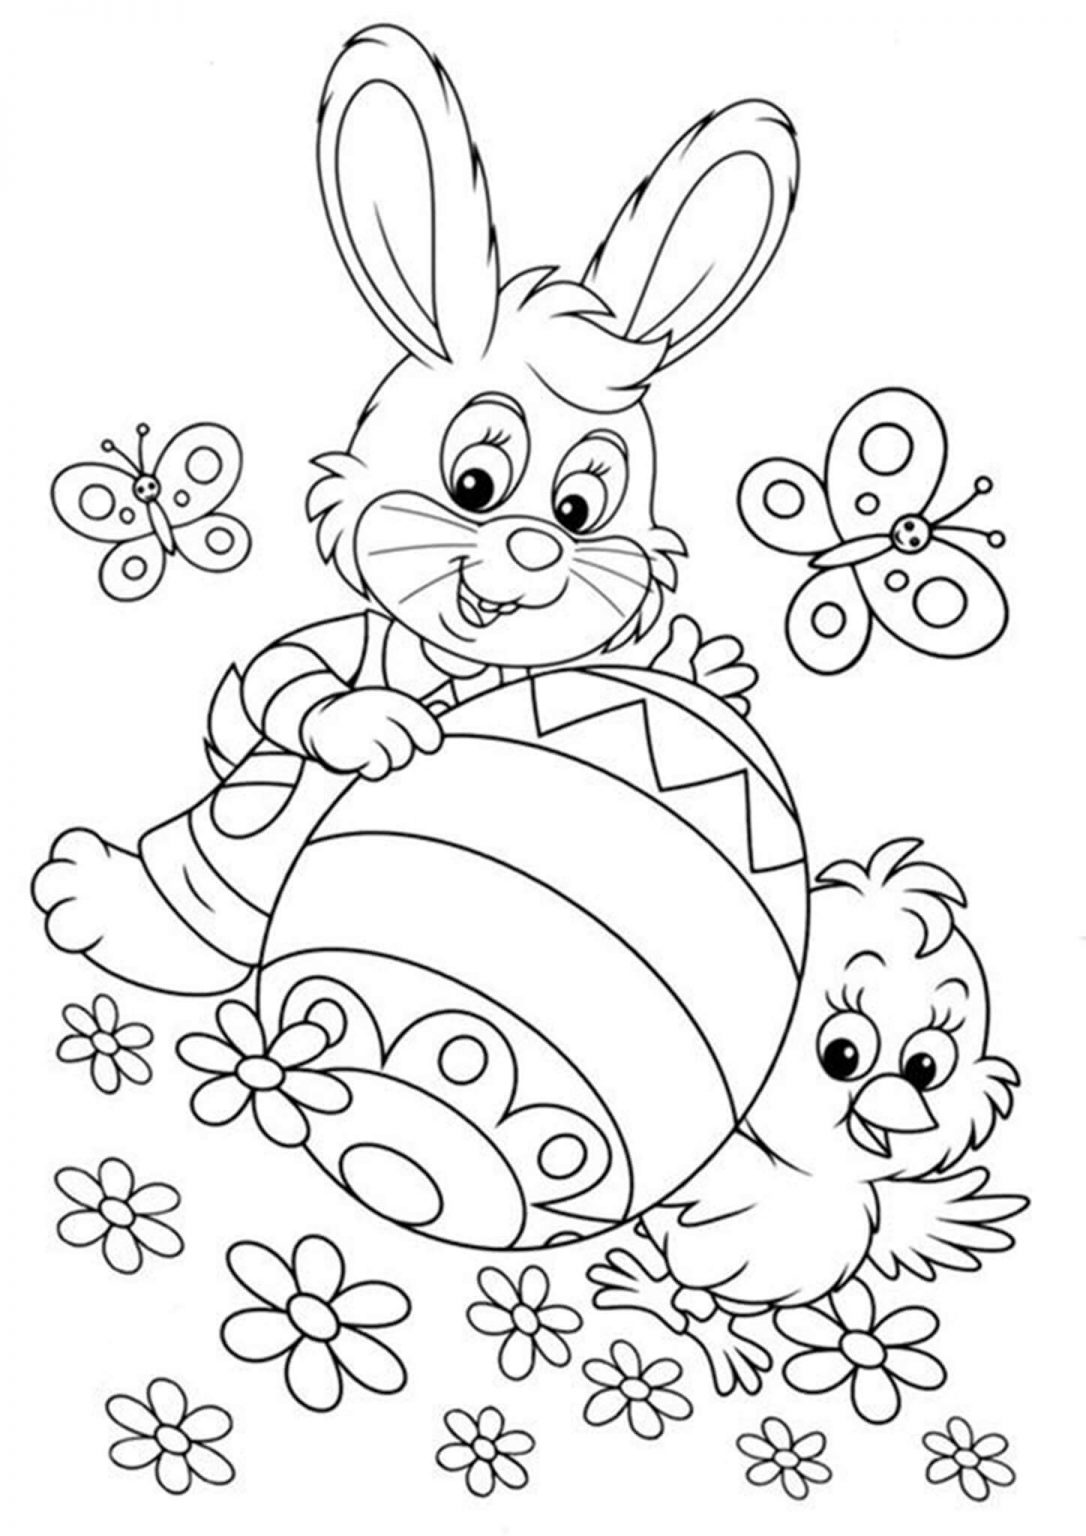 free-easy-to-print-easter-coloring-pages-tulamama